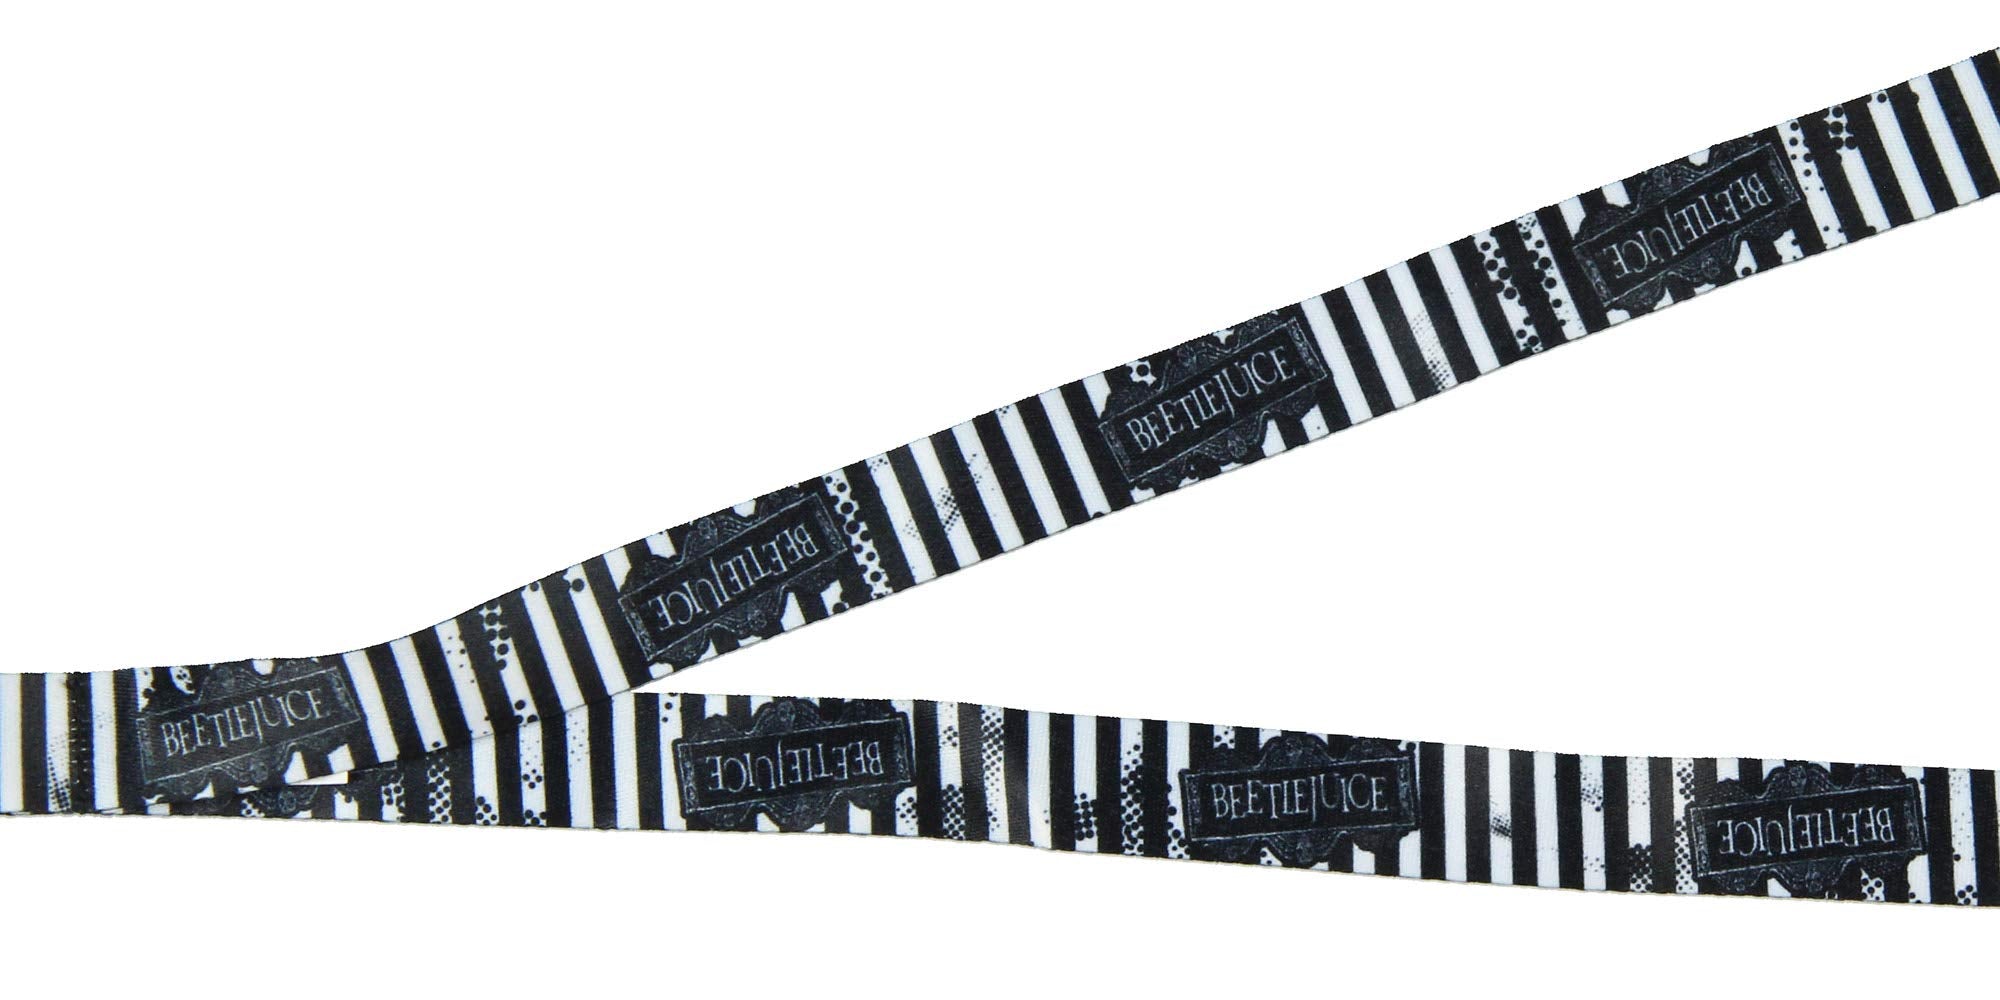 Beetlejuice Never Trust The Living Lanyard ID Holder with Rubber Charm and Collectible Sticker